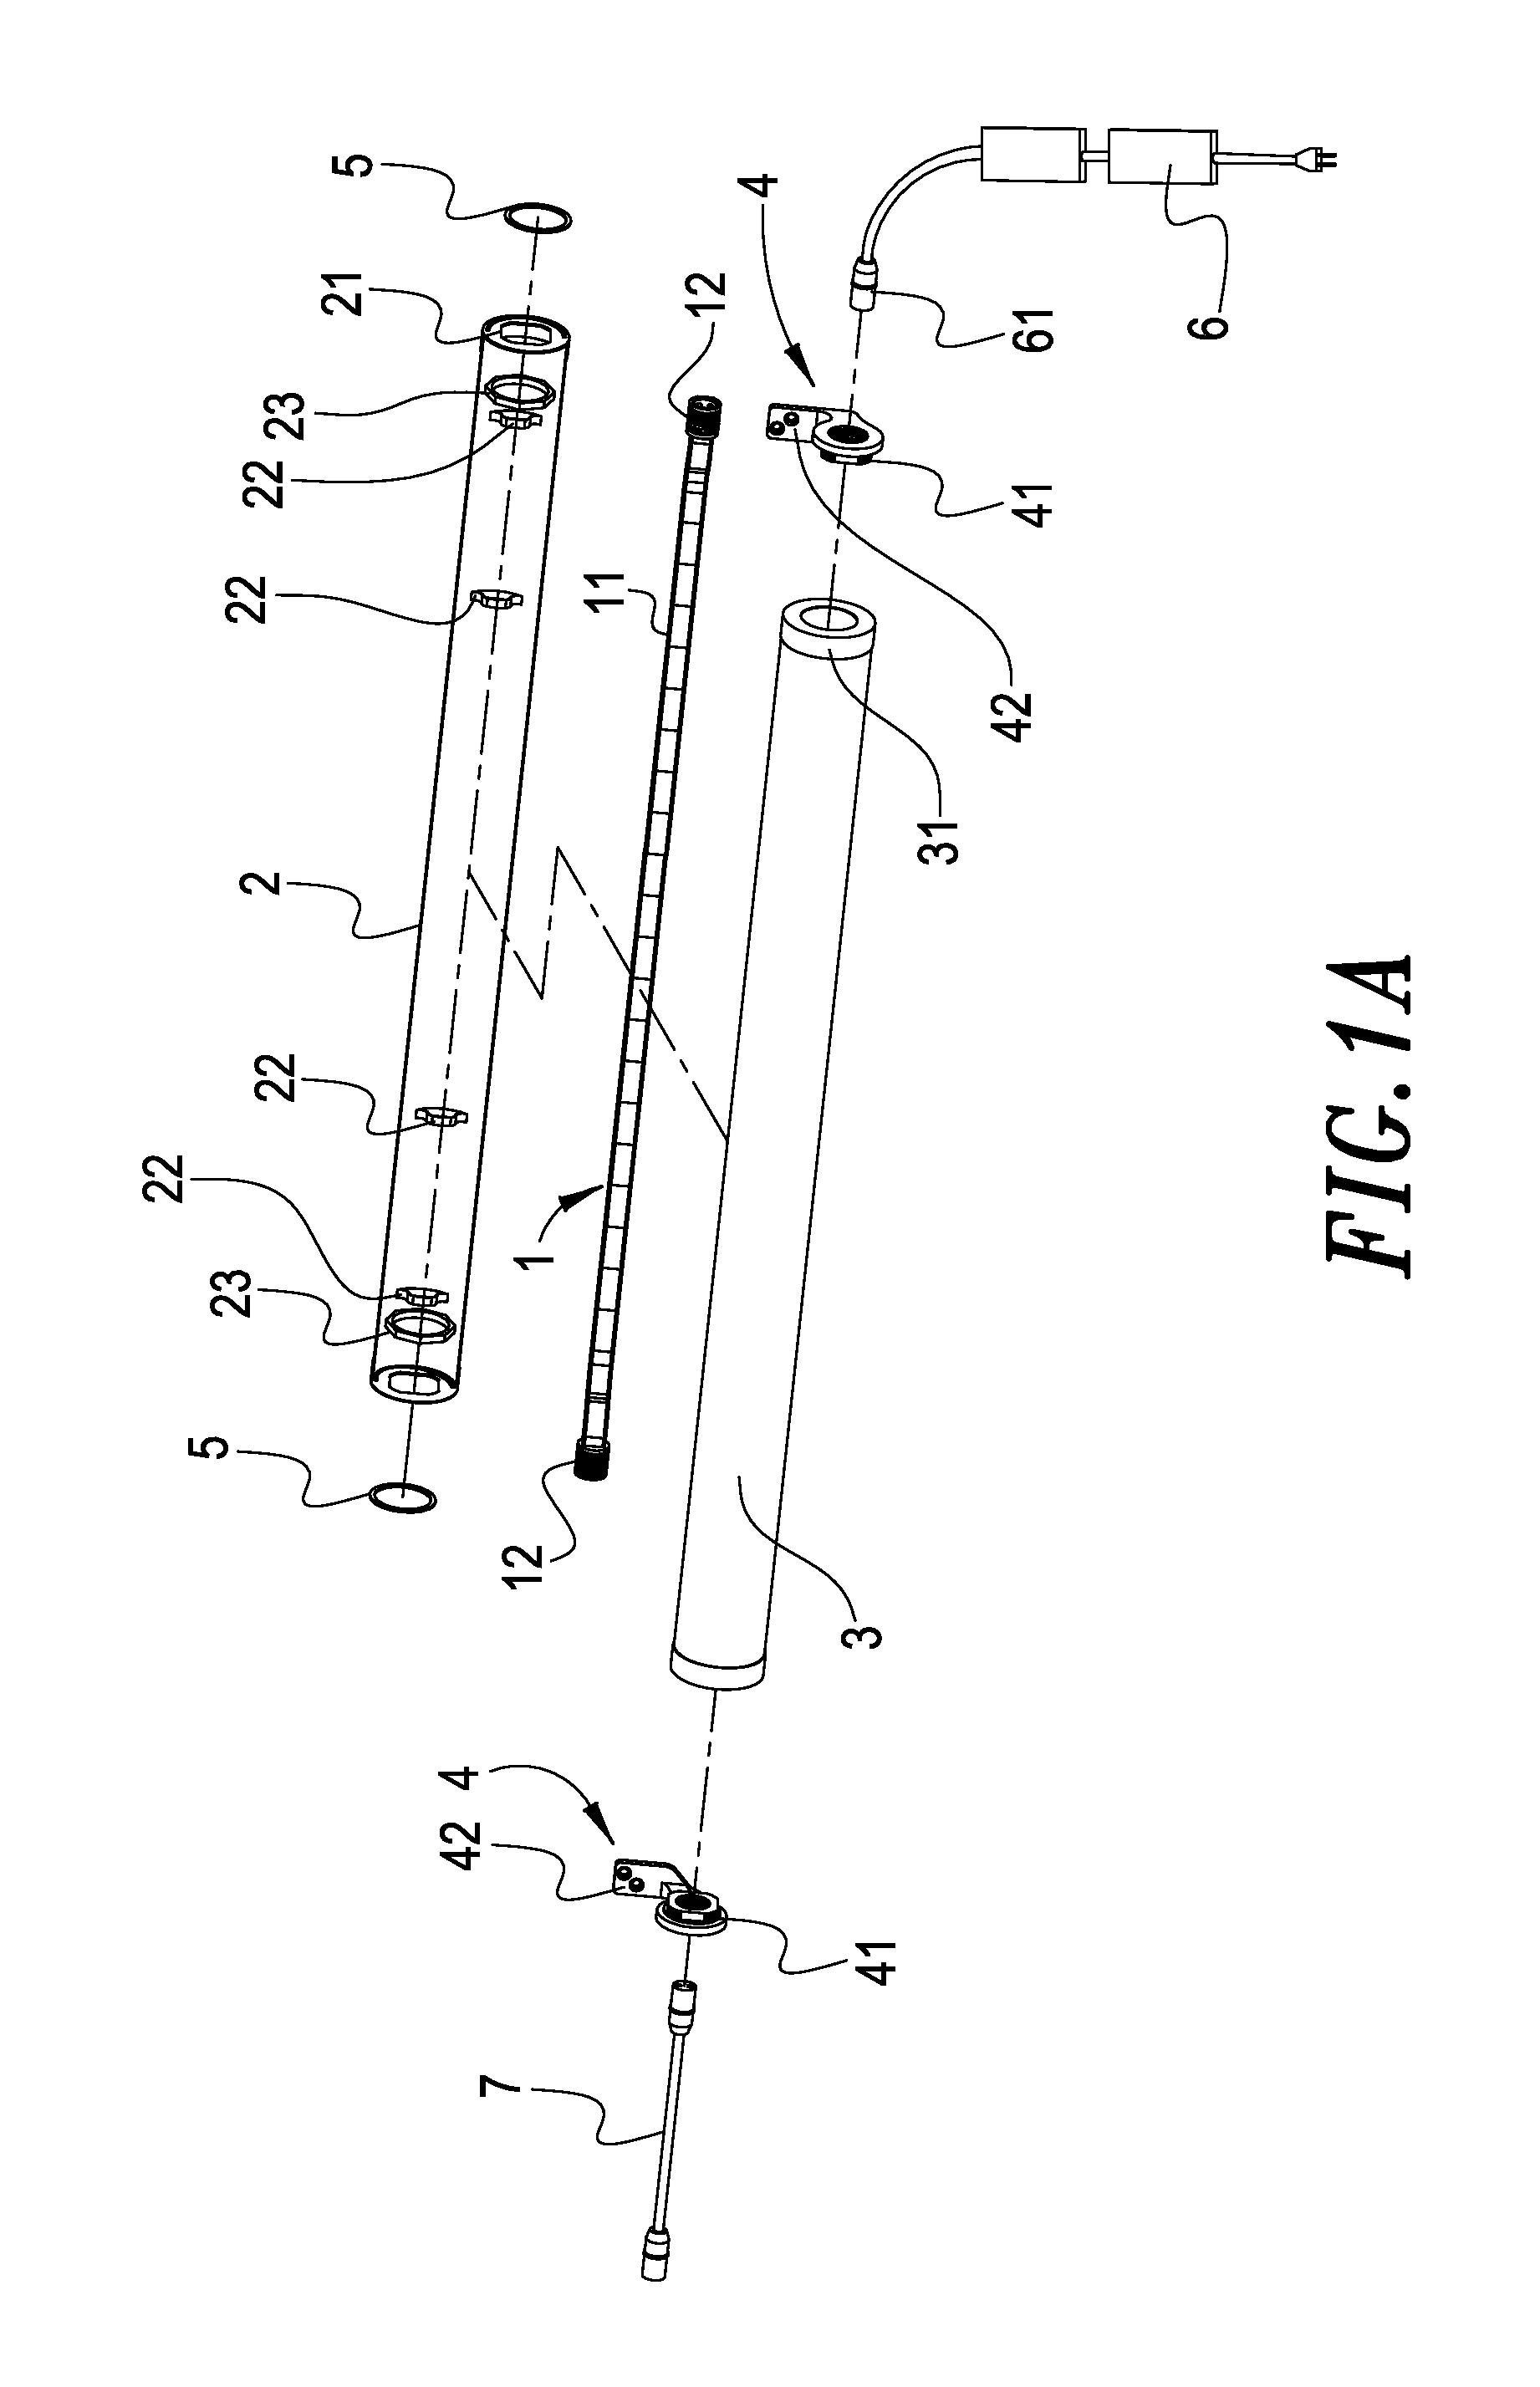 Retractable light-emitting structure